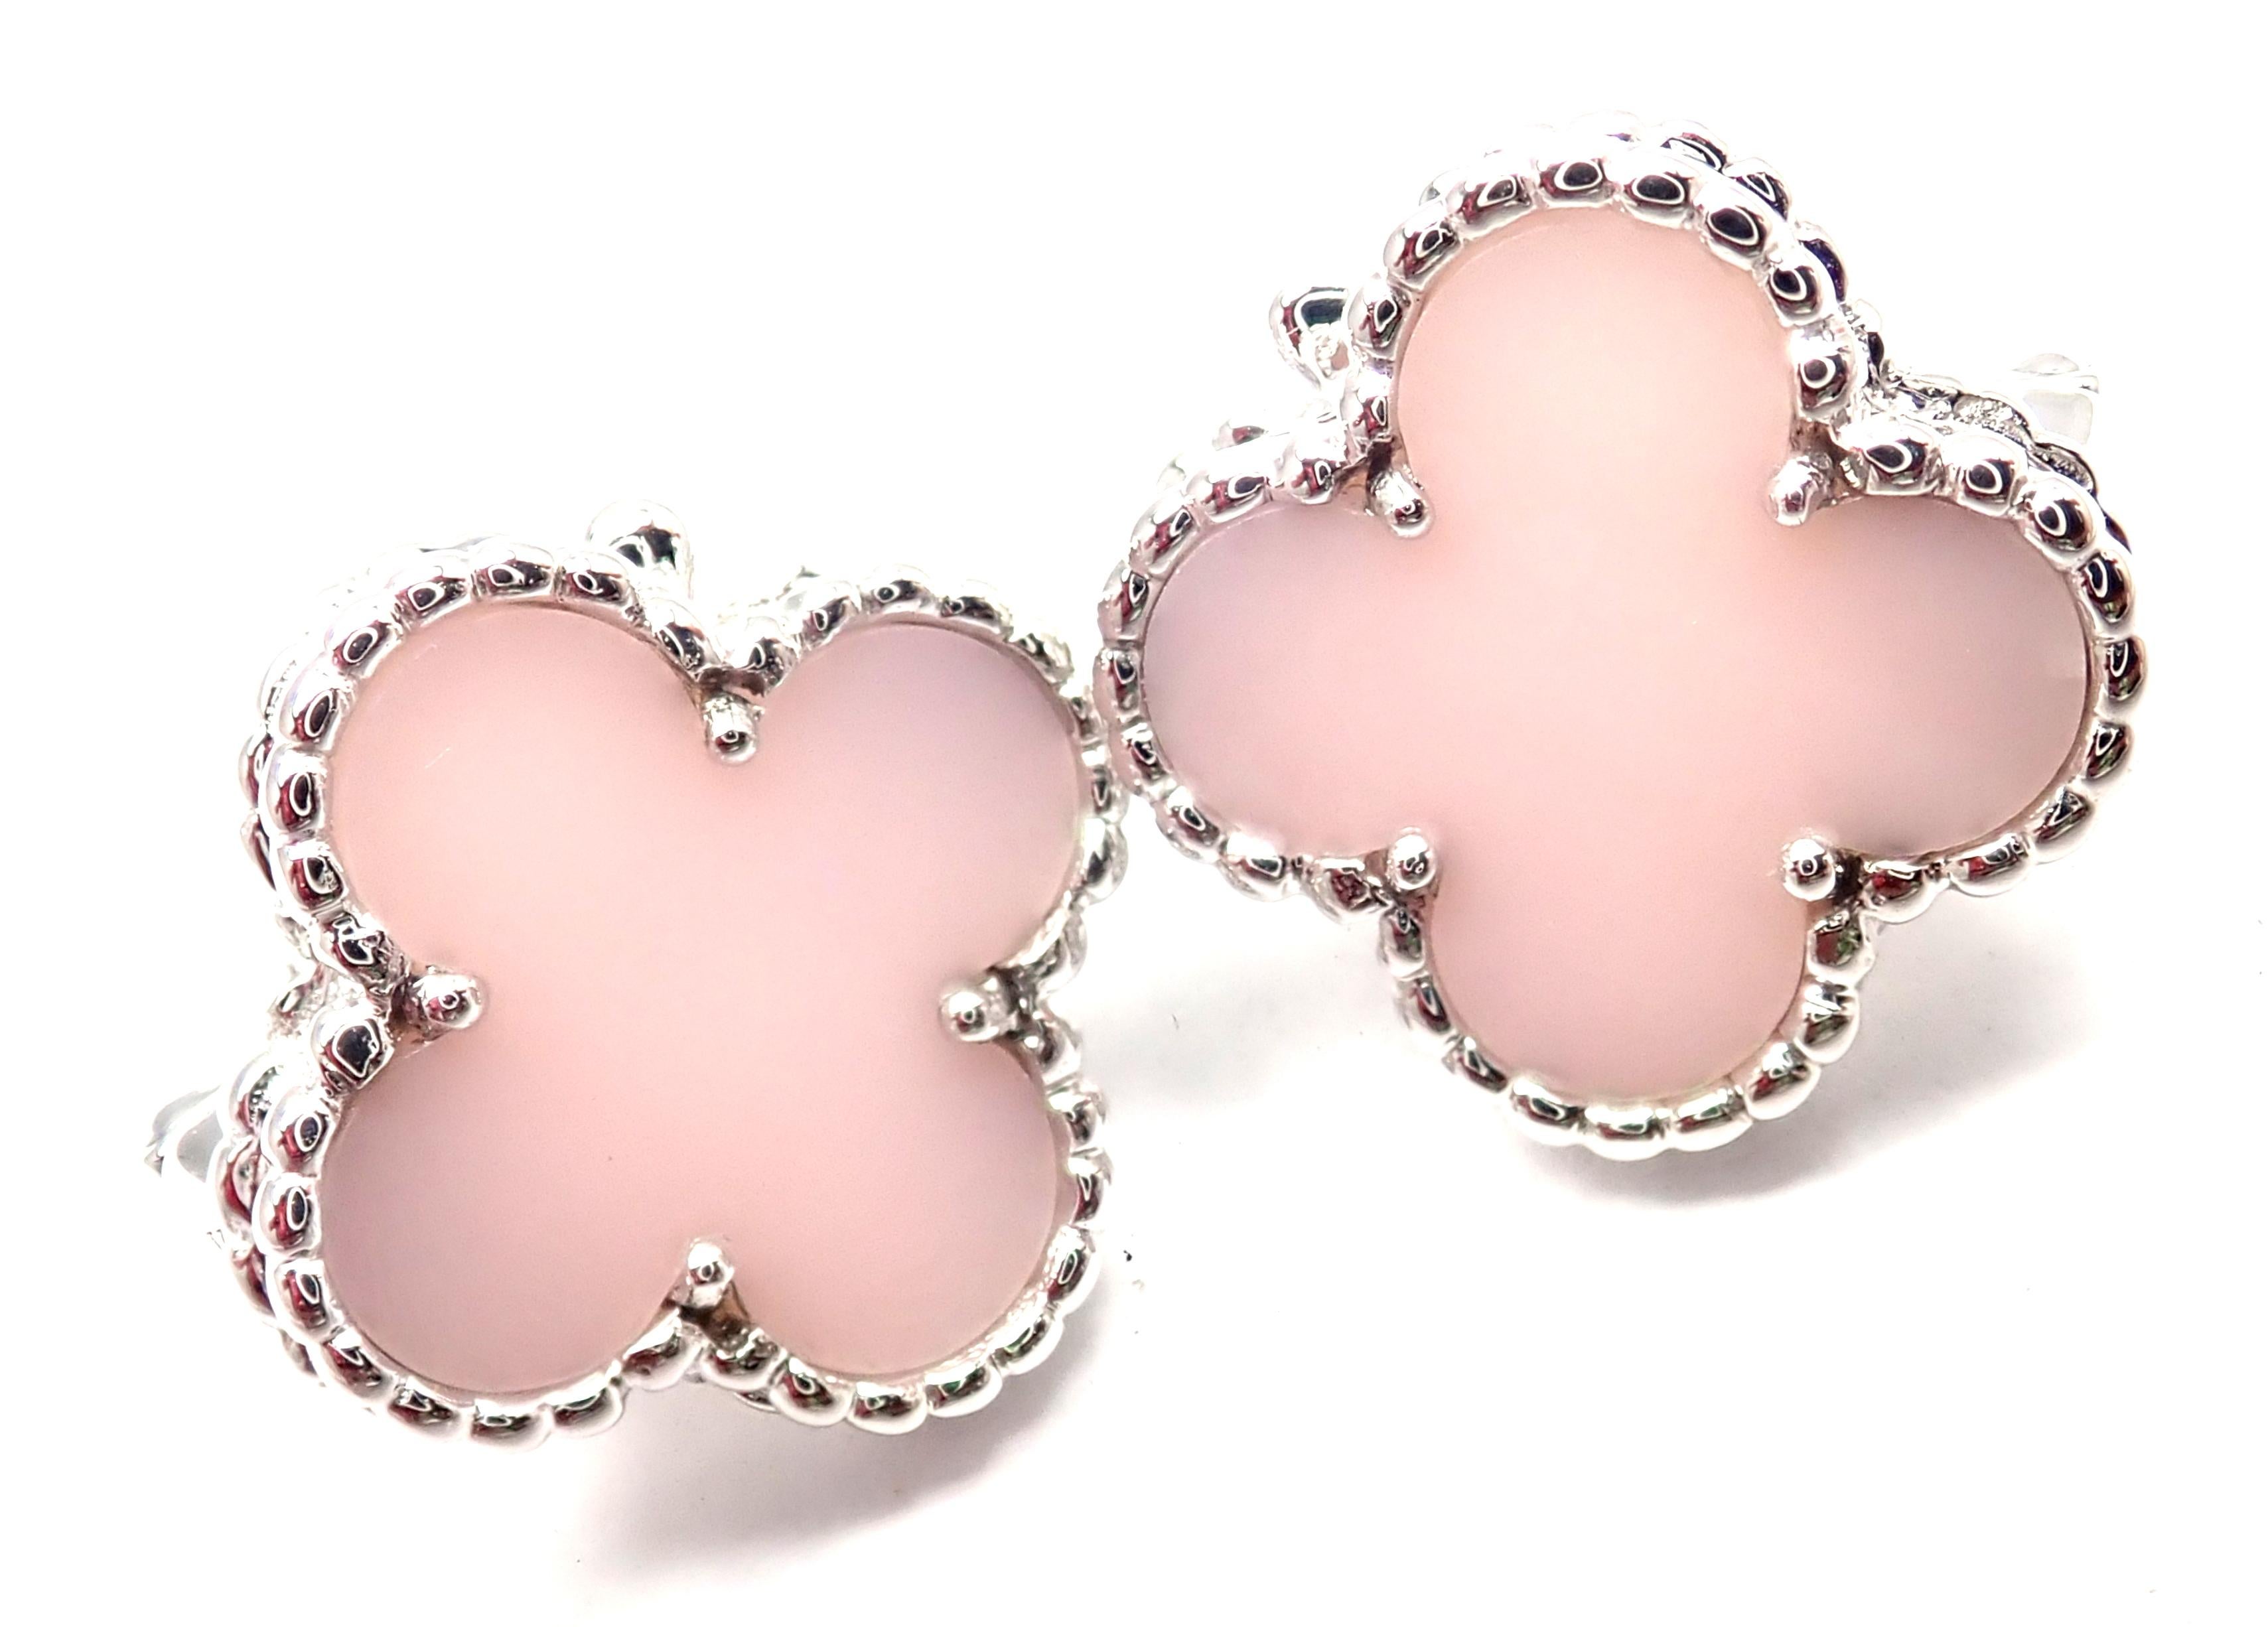 18k White Gold Vintage Alhambra Pink Opal Earrings by Van Cleef & Arpels. 
With 2 pink opal stones: 15mm each. 
These earrings are for pierced ears. 
Details: 
Measurements: 15mm x 15mm 
Alhambra: 15mm 
Weight: 7.6 grams
Stamped Hallmarks: VCA 750